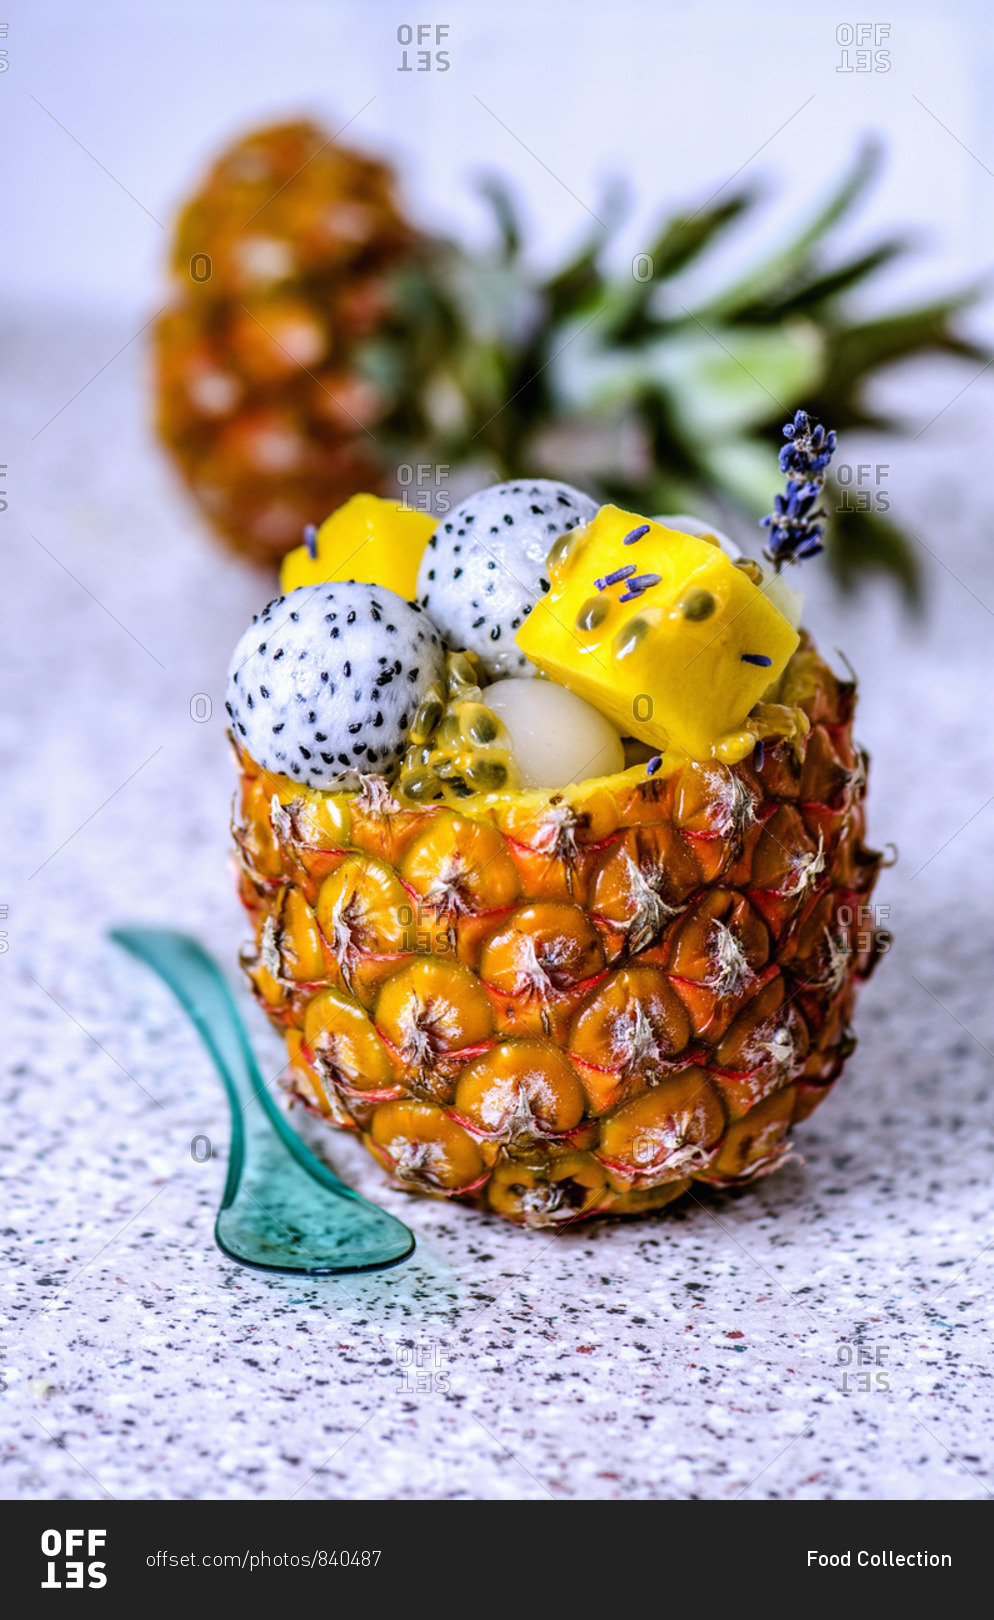 Fruit salad with various tropical fruits in a pineapple with blue transparent spoon